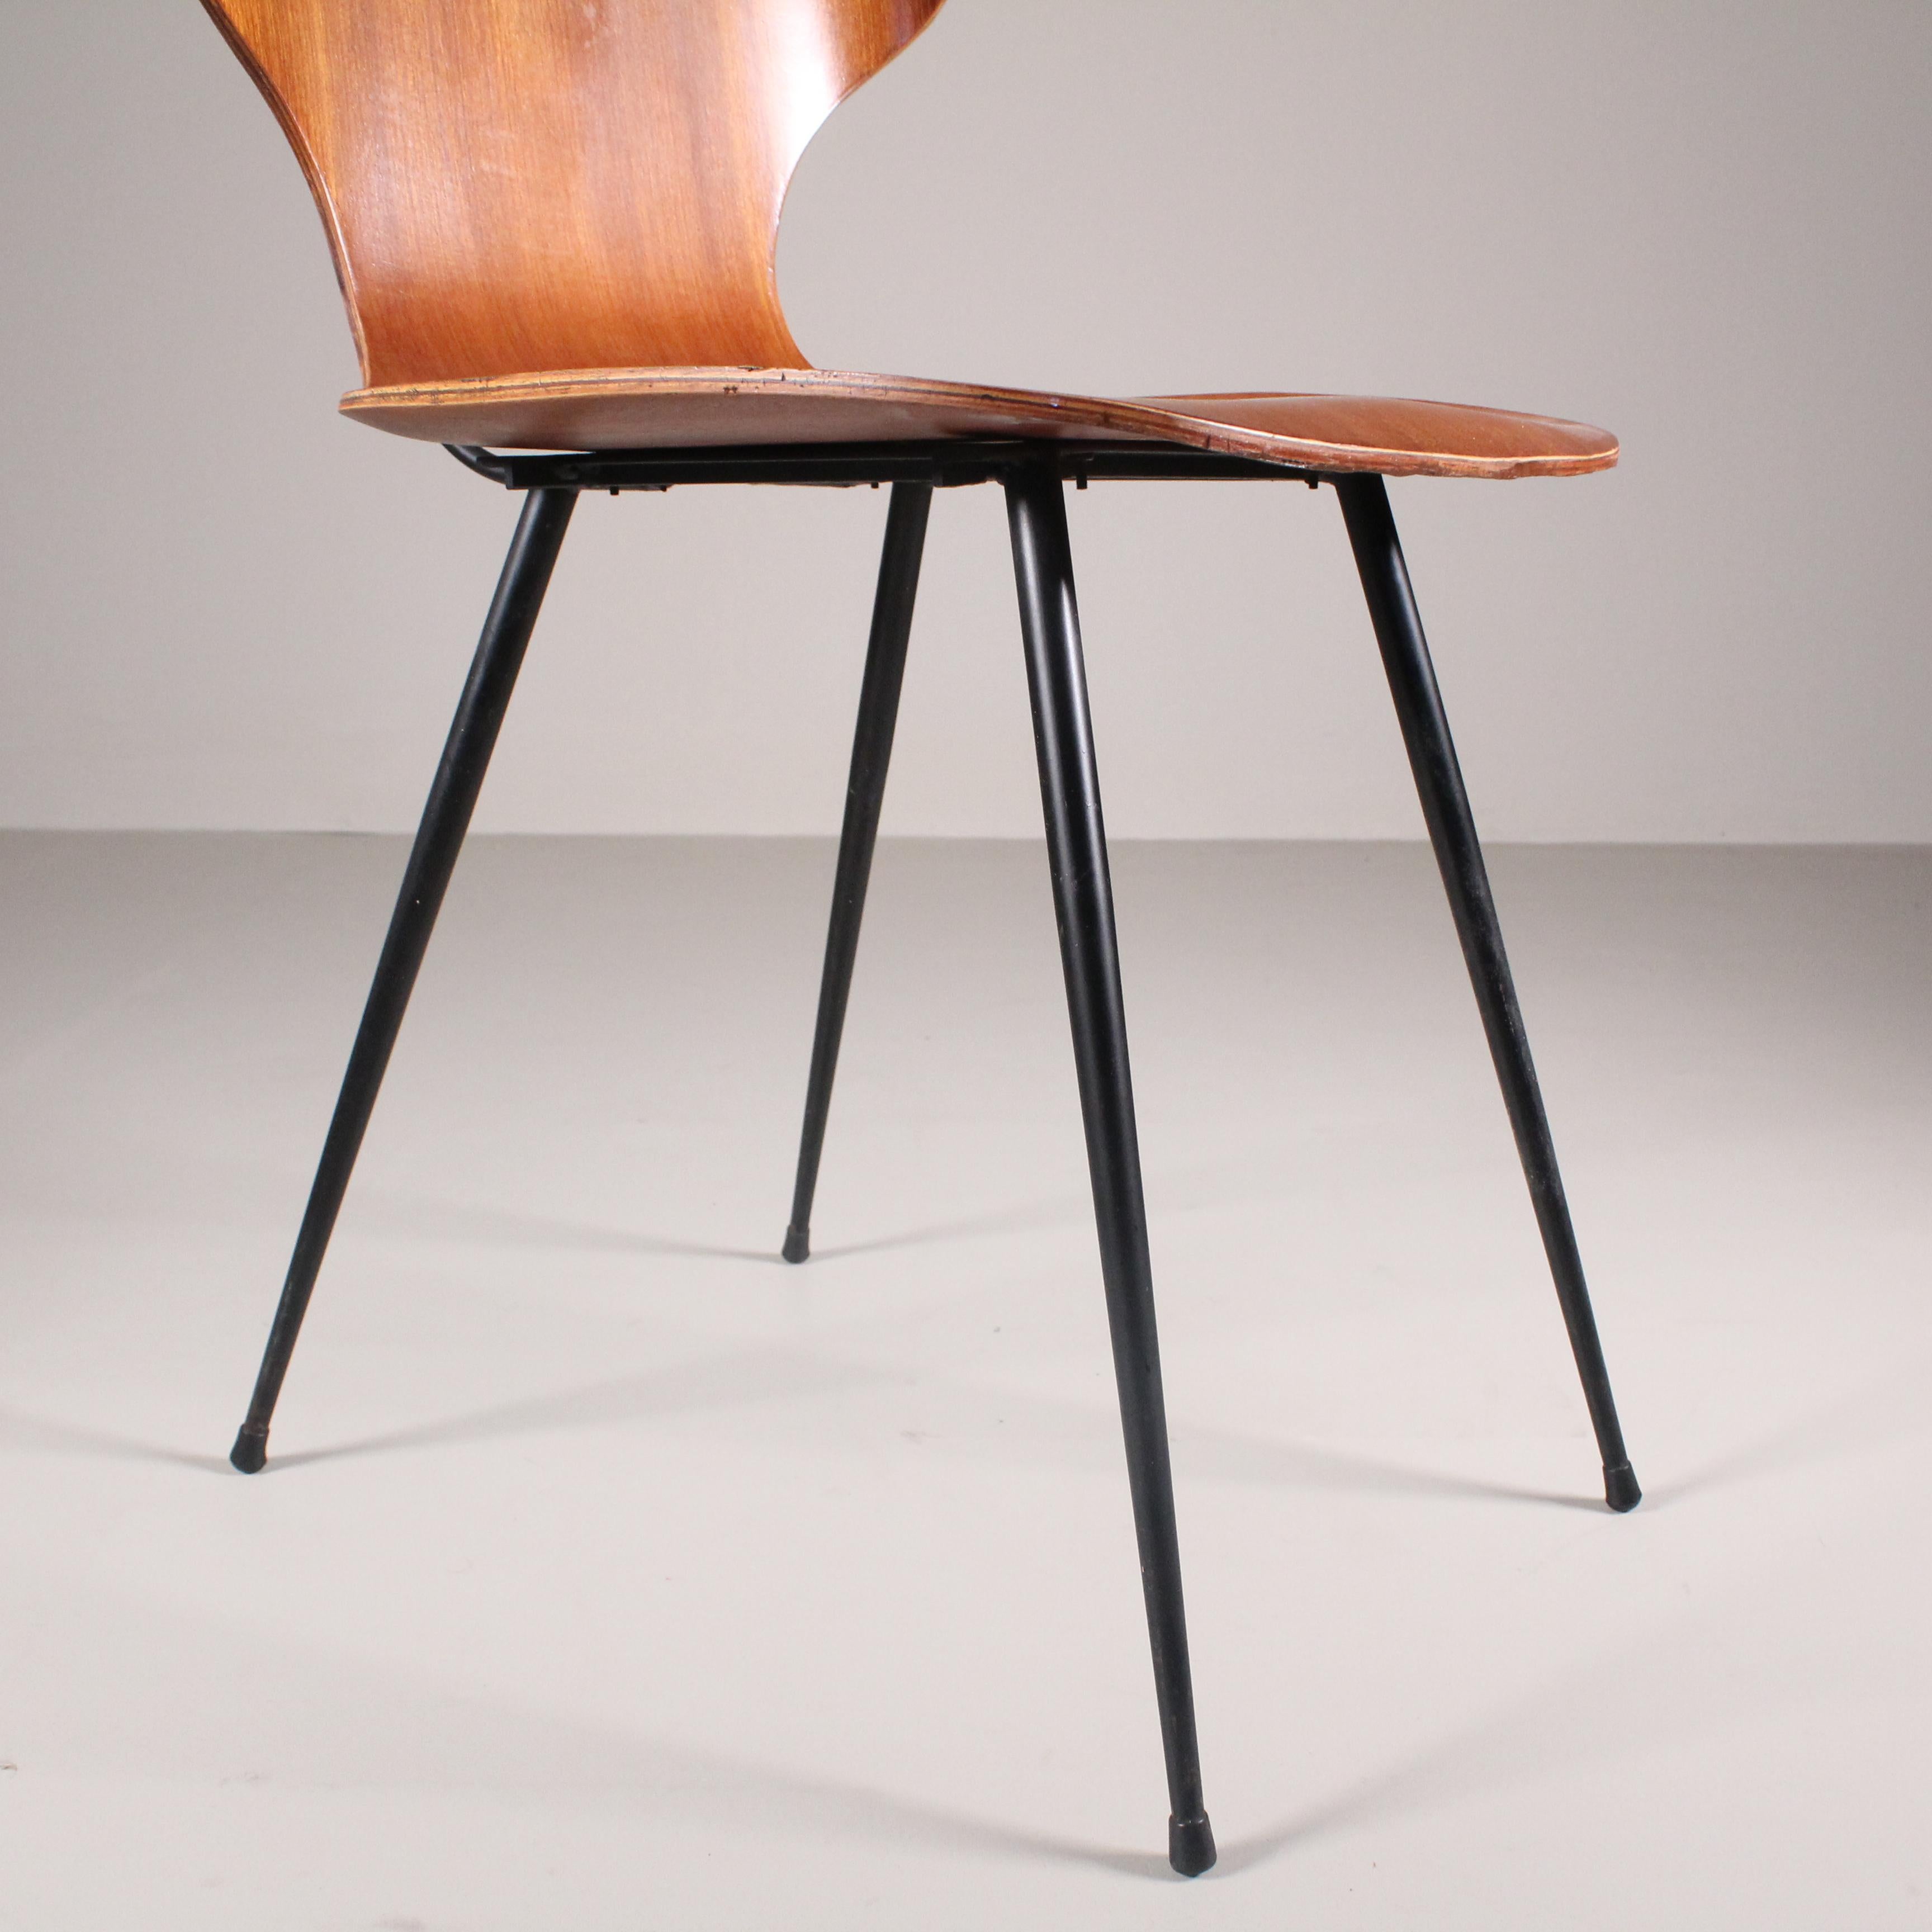 Set of 4 Lulli Chairs, Carlo Ratti, Curved Woods Industry, 1950s For Sale 4